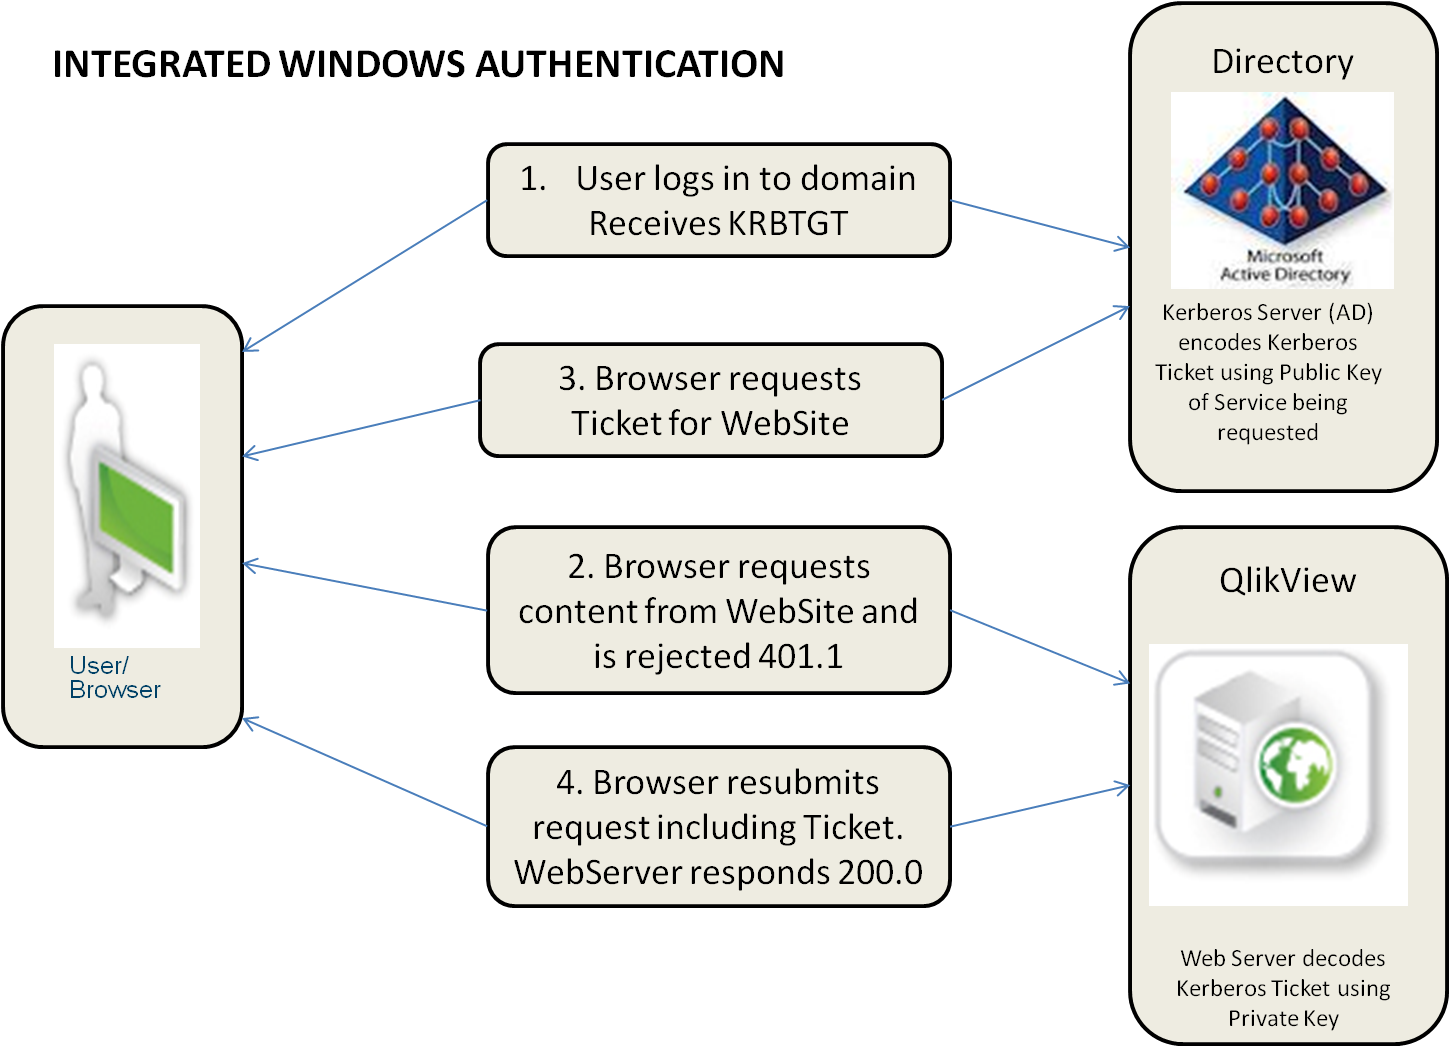 First, the user logs in to the domain and receives KRBTGT. Second, the browser requests content from the website and is rejected 401.1. Third, the browser requests a ticket for the website. Fourth, the browser resubmits the request with the ticket. The web server responds 200.0.